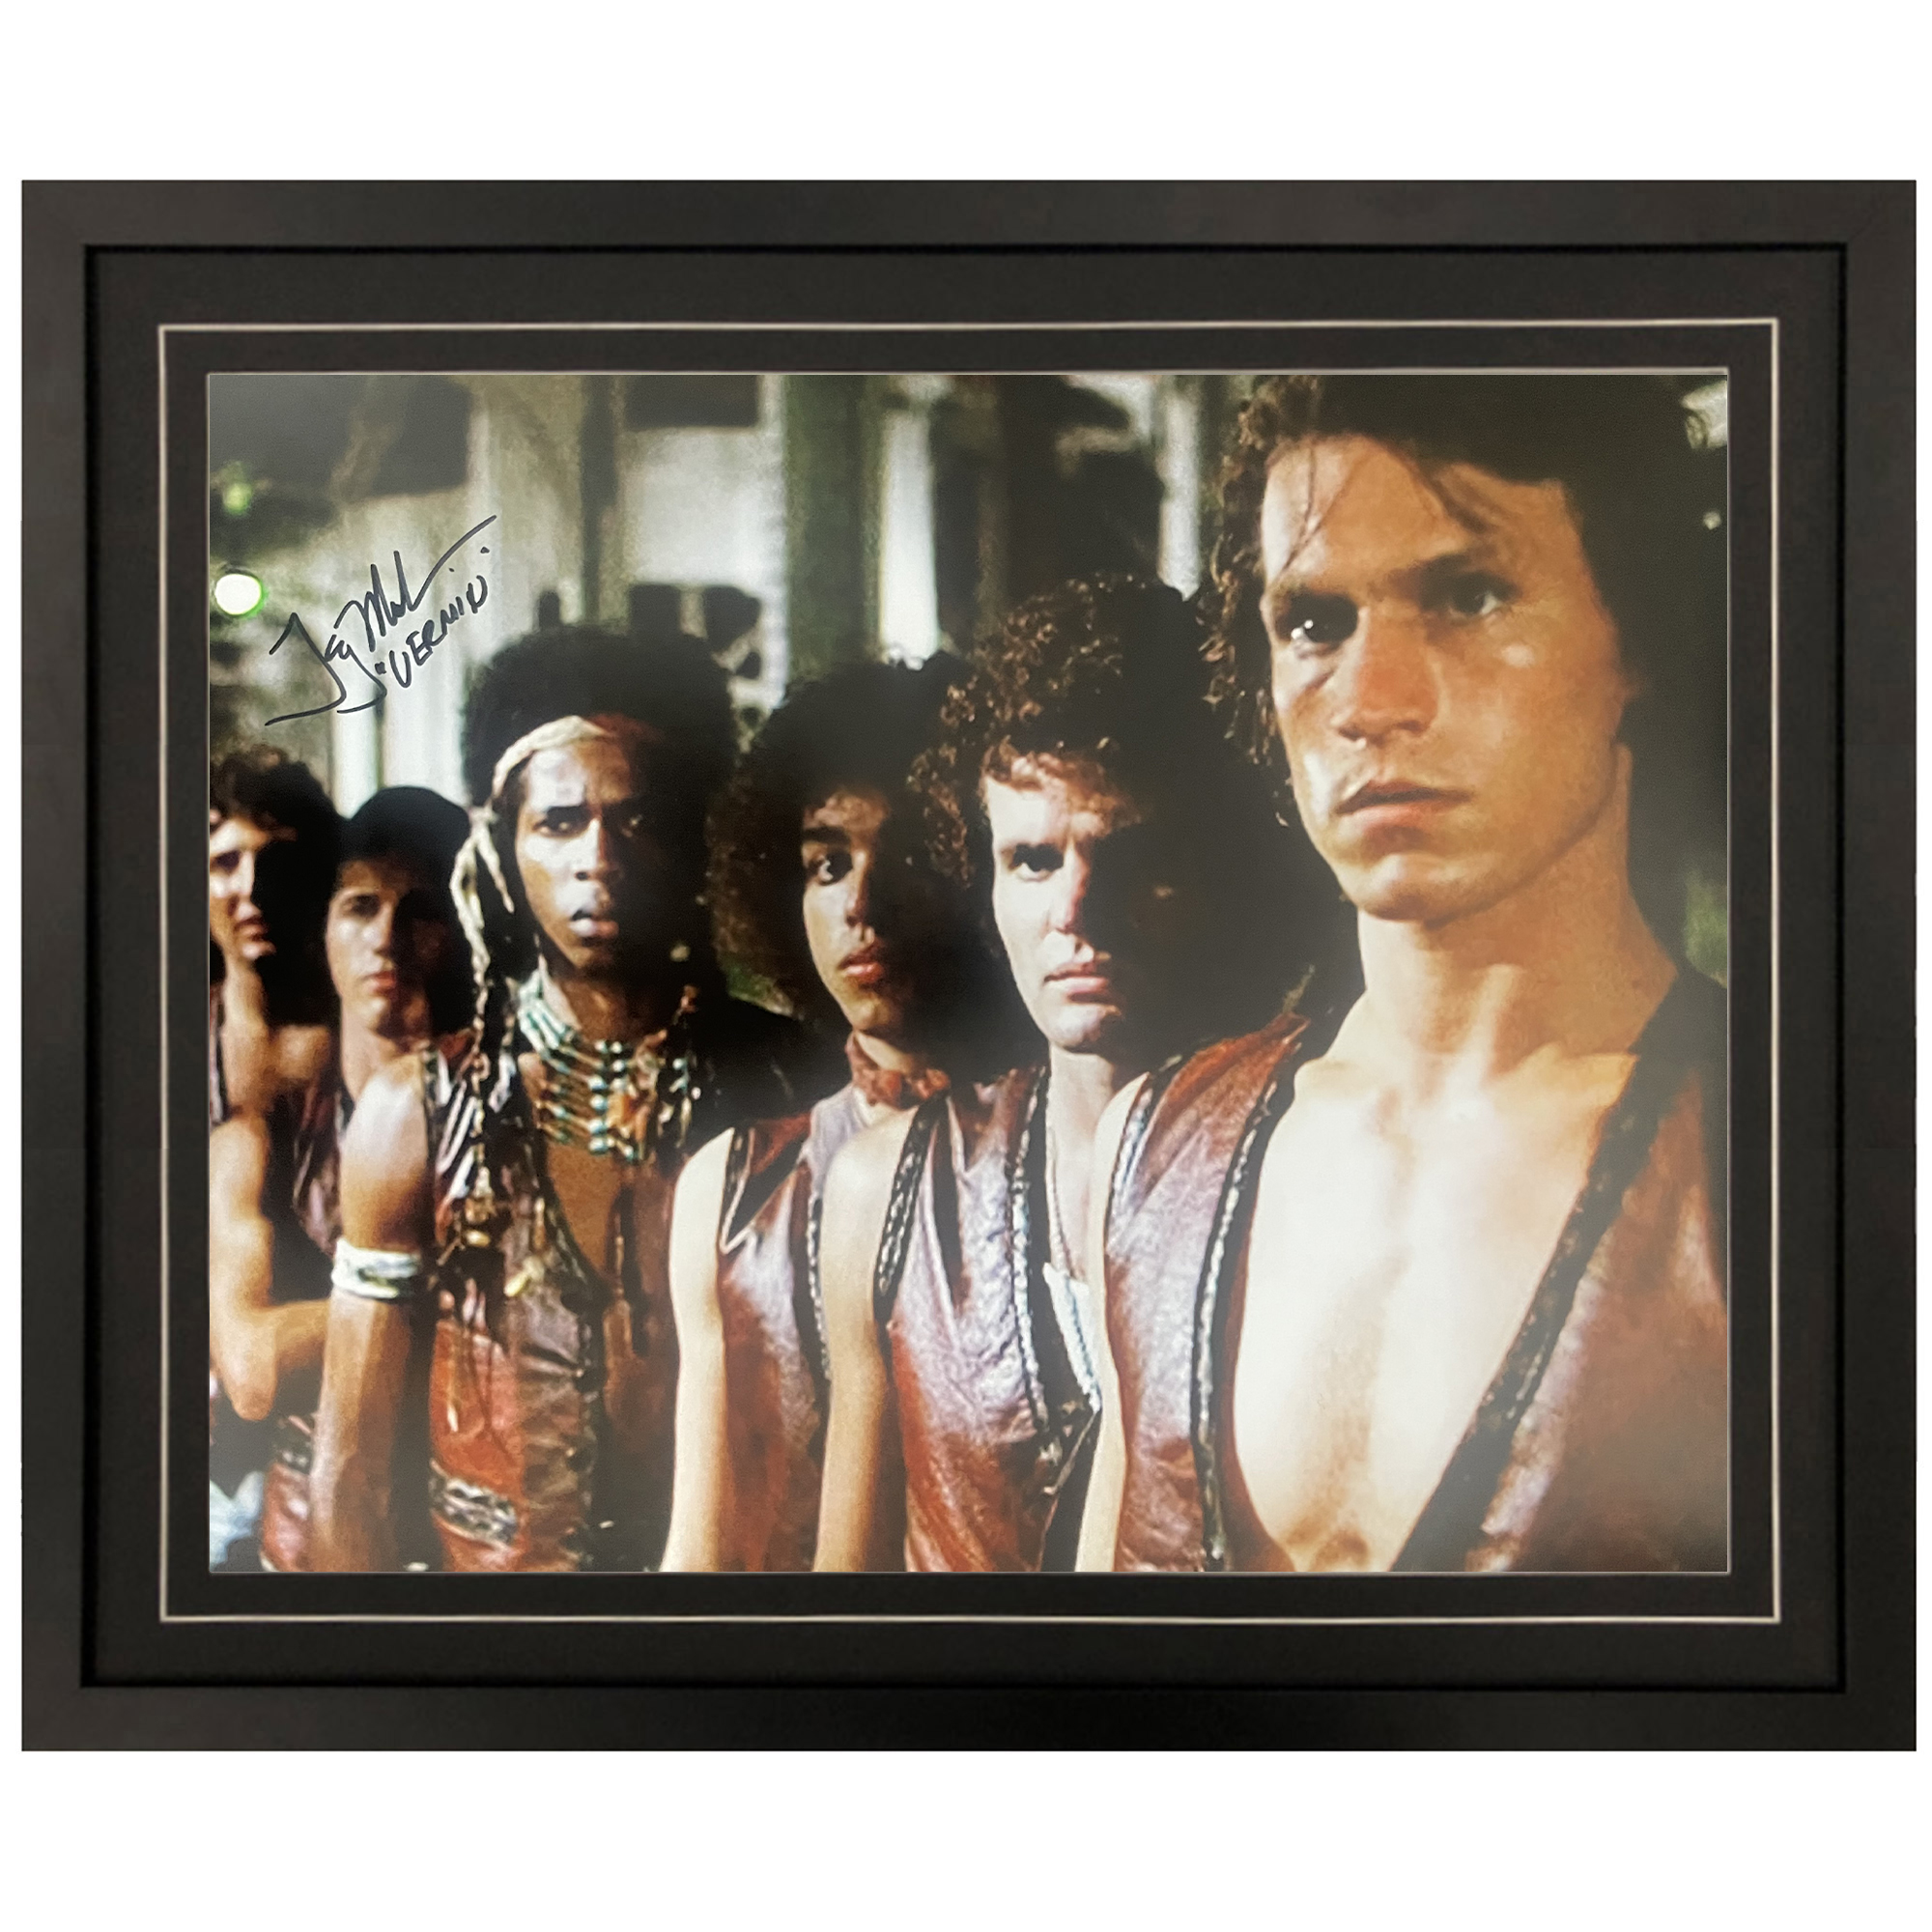 Terry Michos – “The Warriors – Vermin” Signed ...